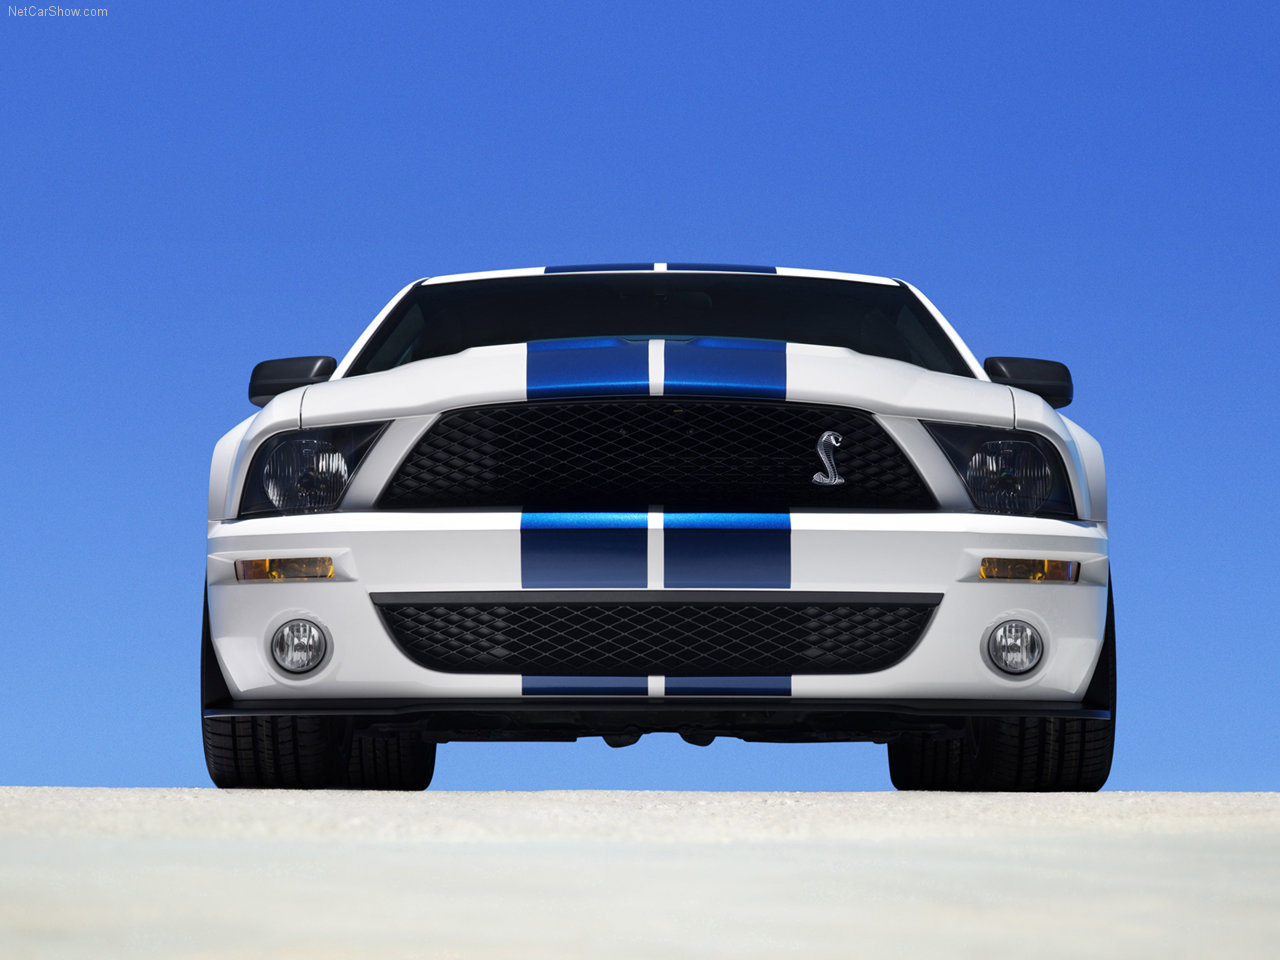 Ford-Mustang Shelby GT500 2007 1280x960 wallpaper 08